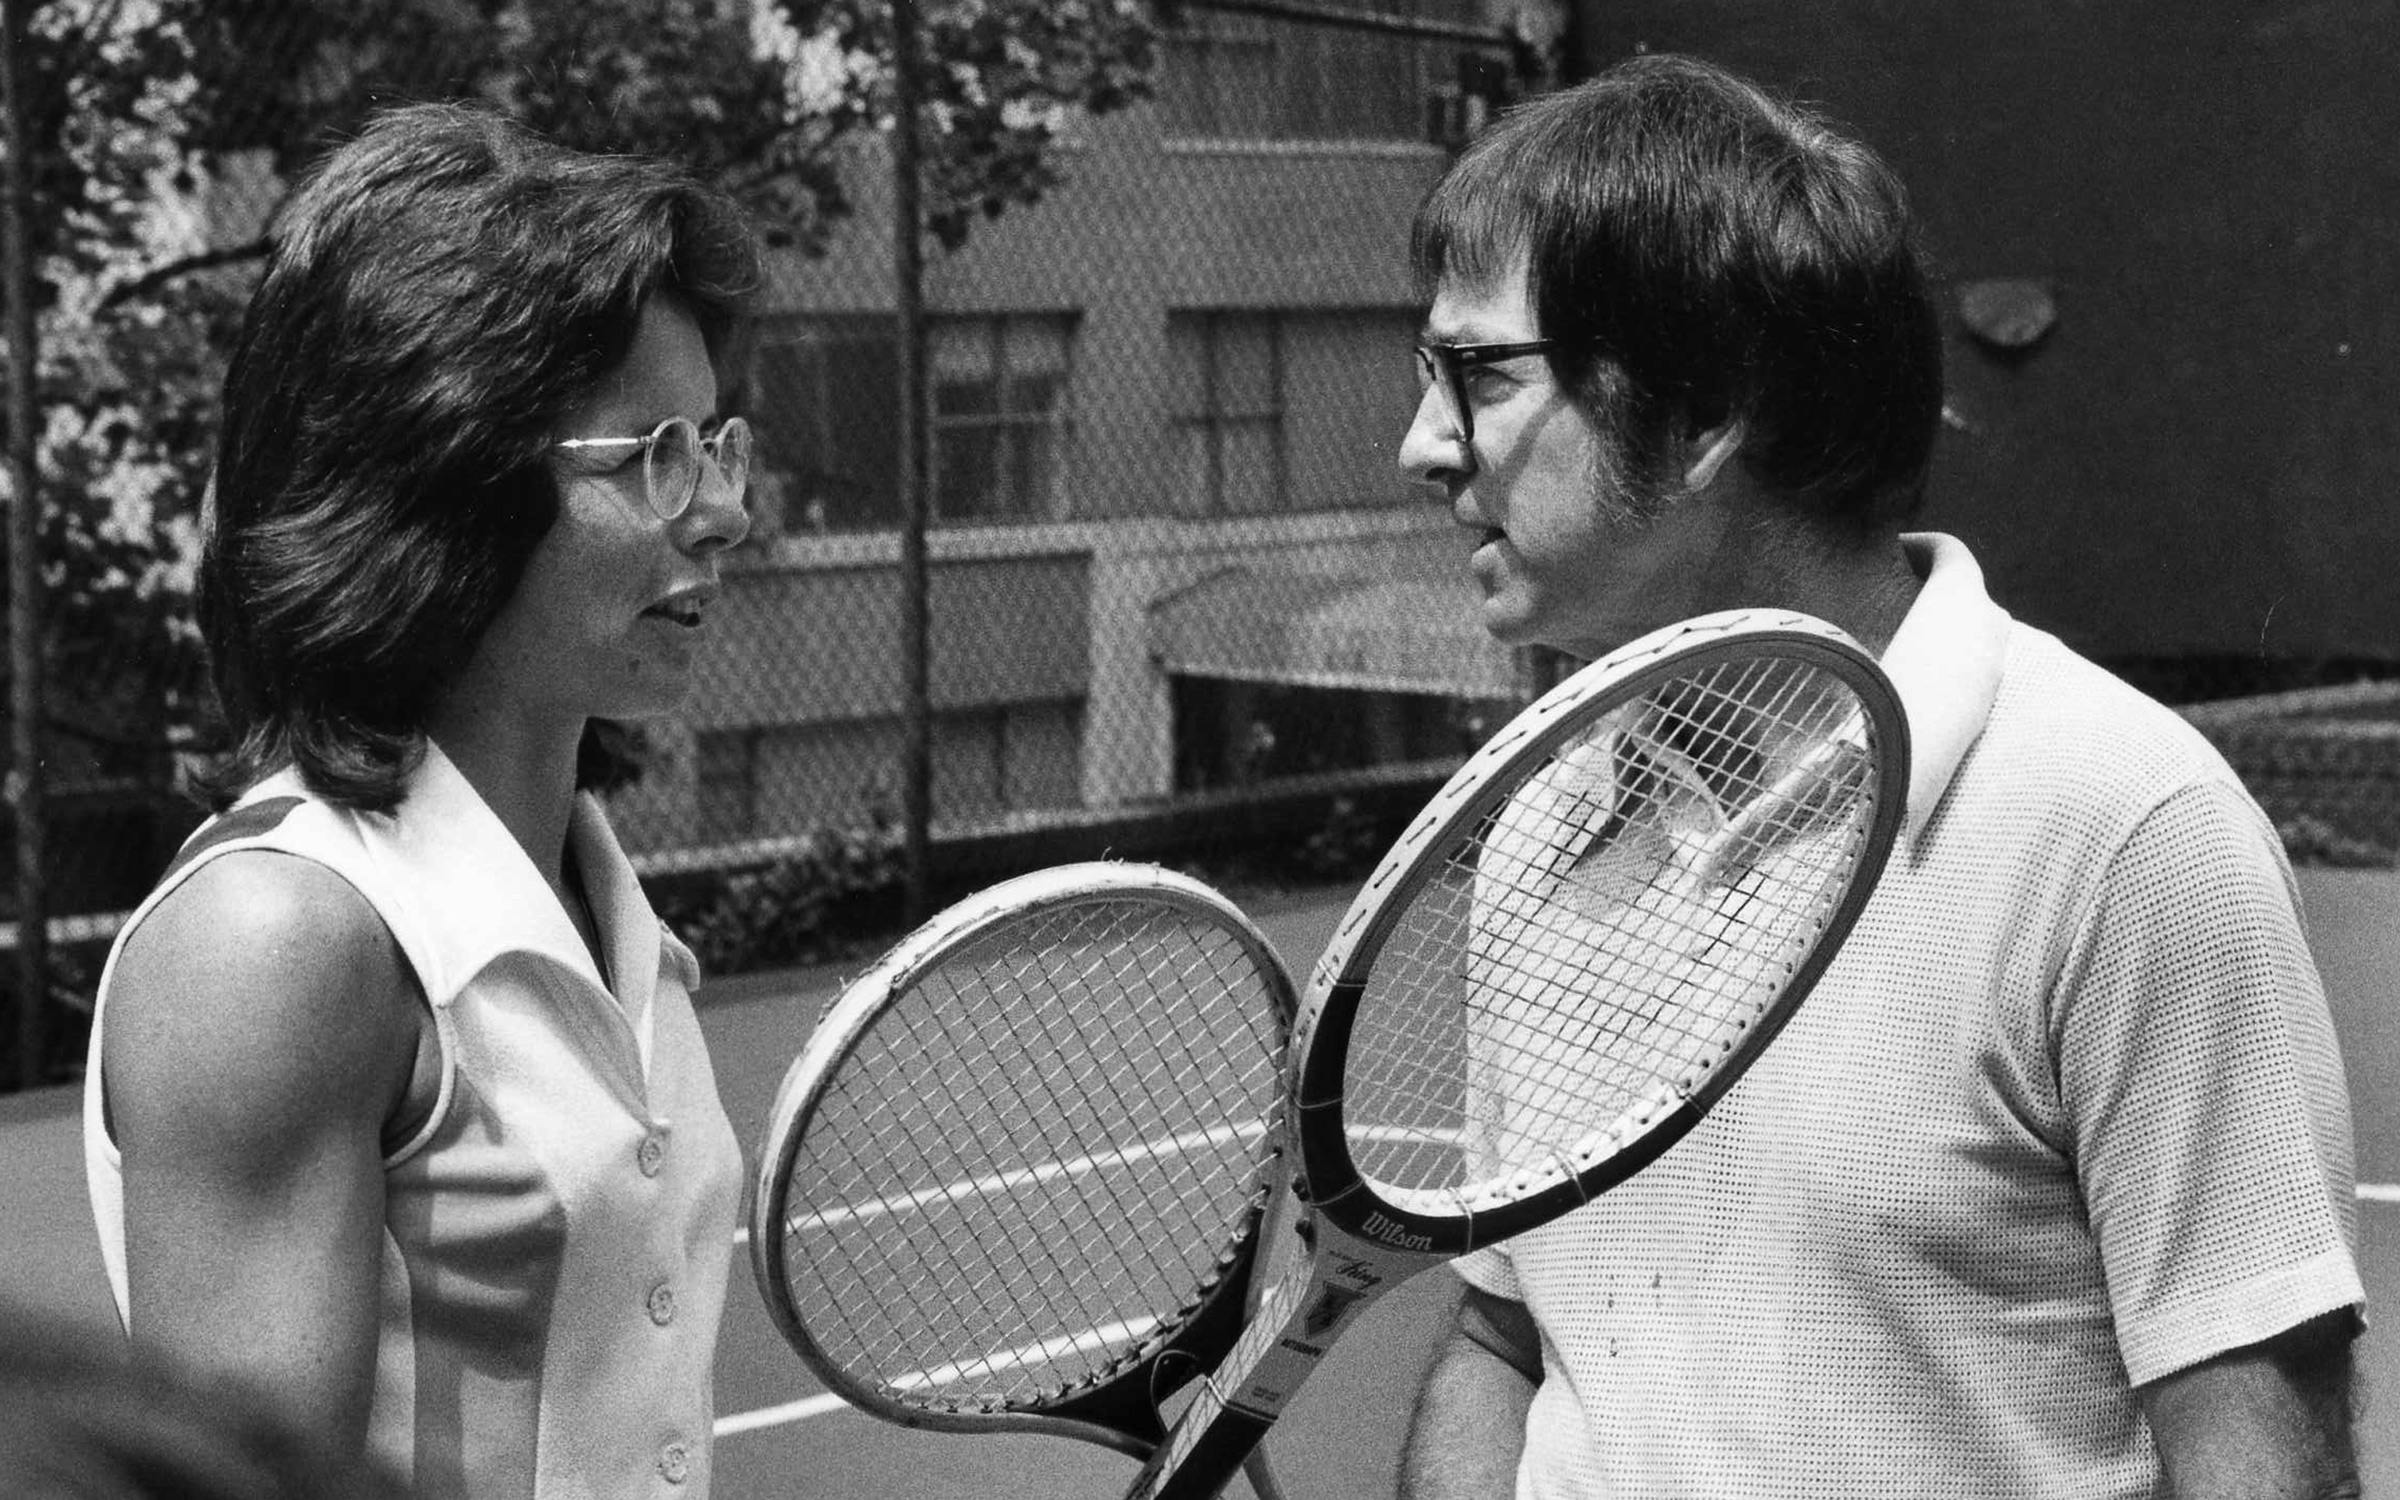 Photos: When Billie Jean King won the 'Battle of the Sexes